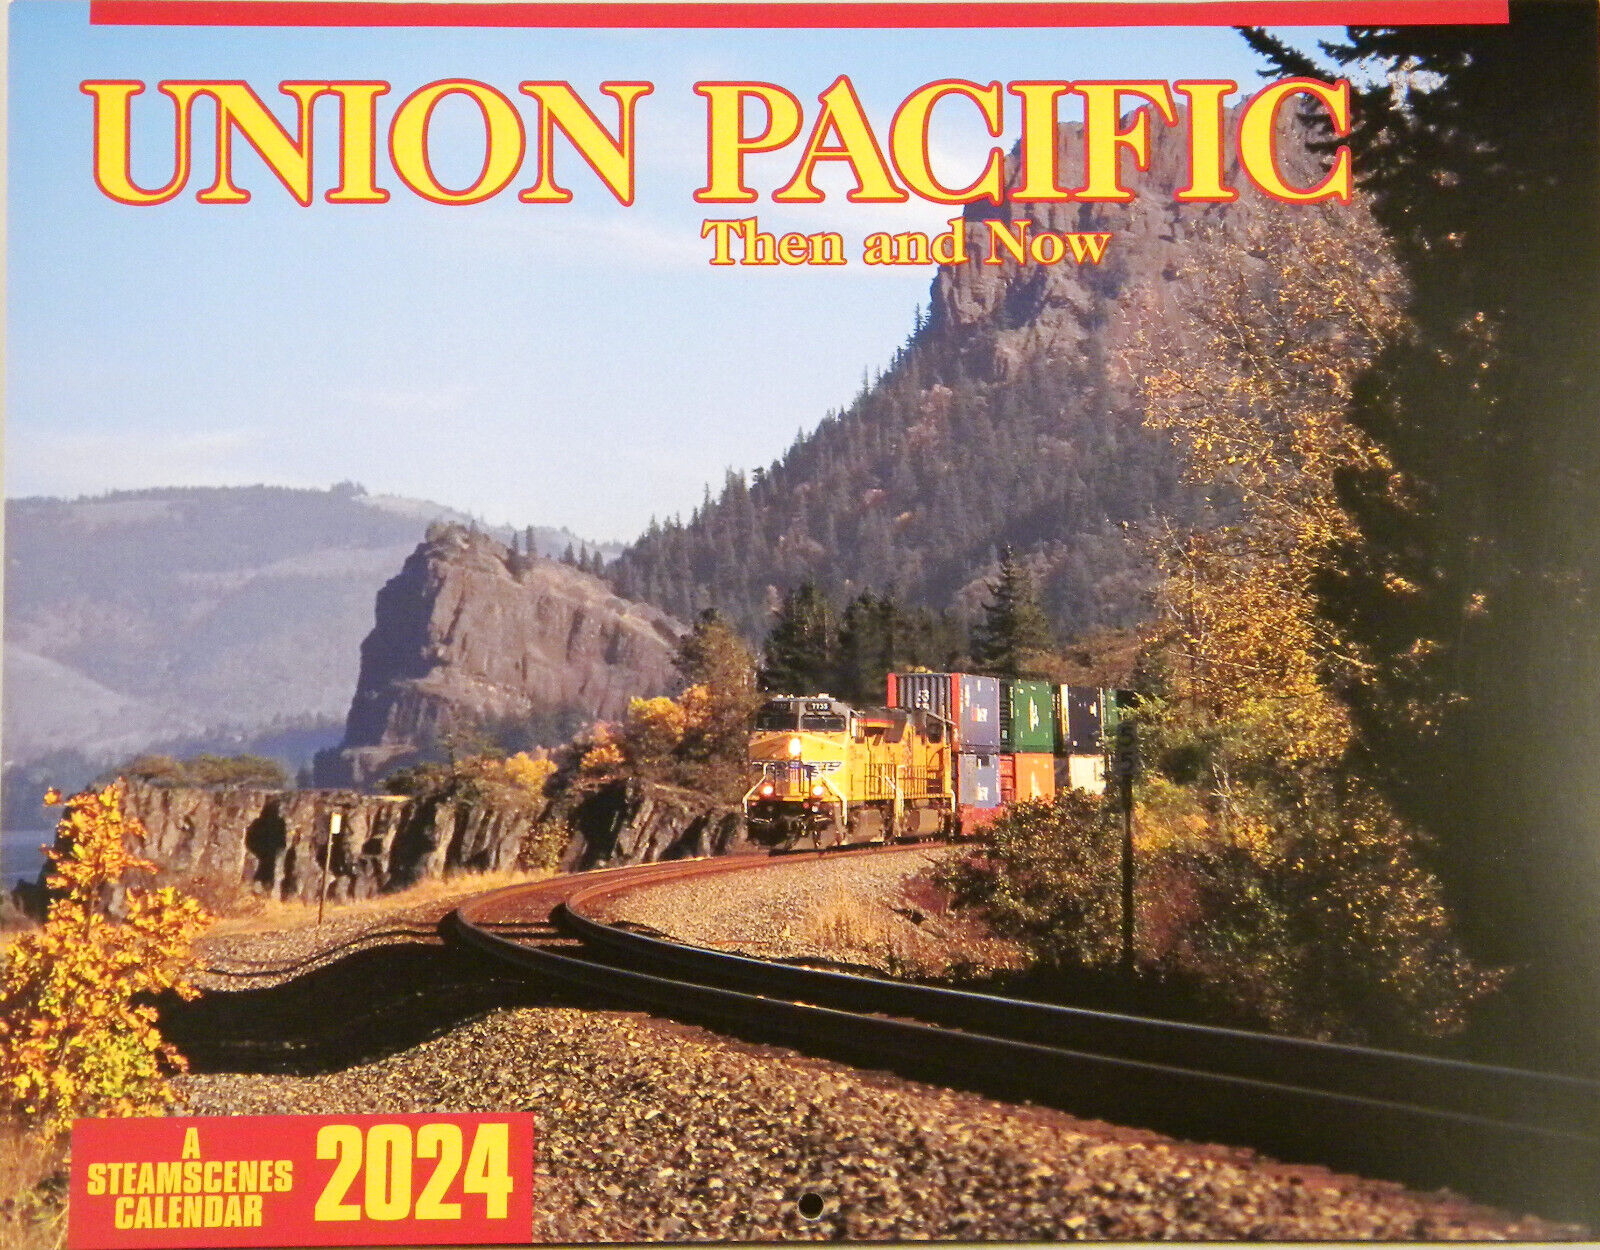 NEW Steamscenes Union Pacific Then and Now 2024 Calendar